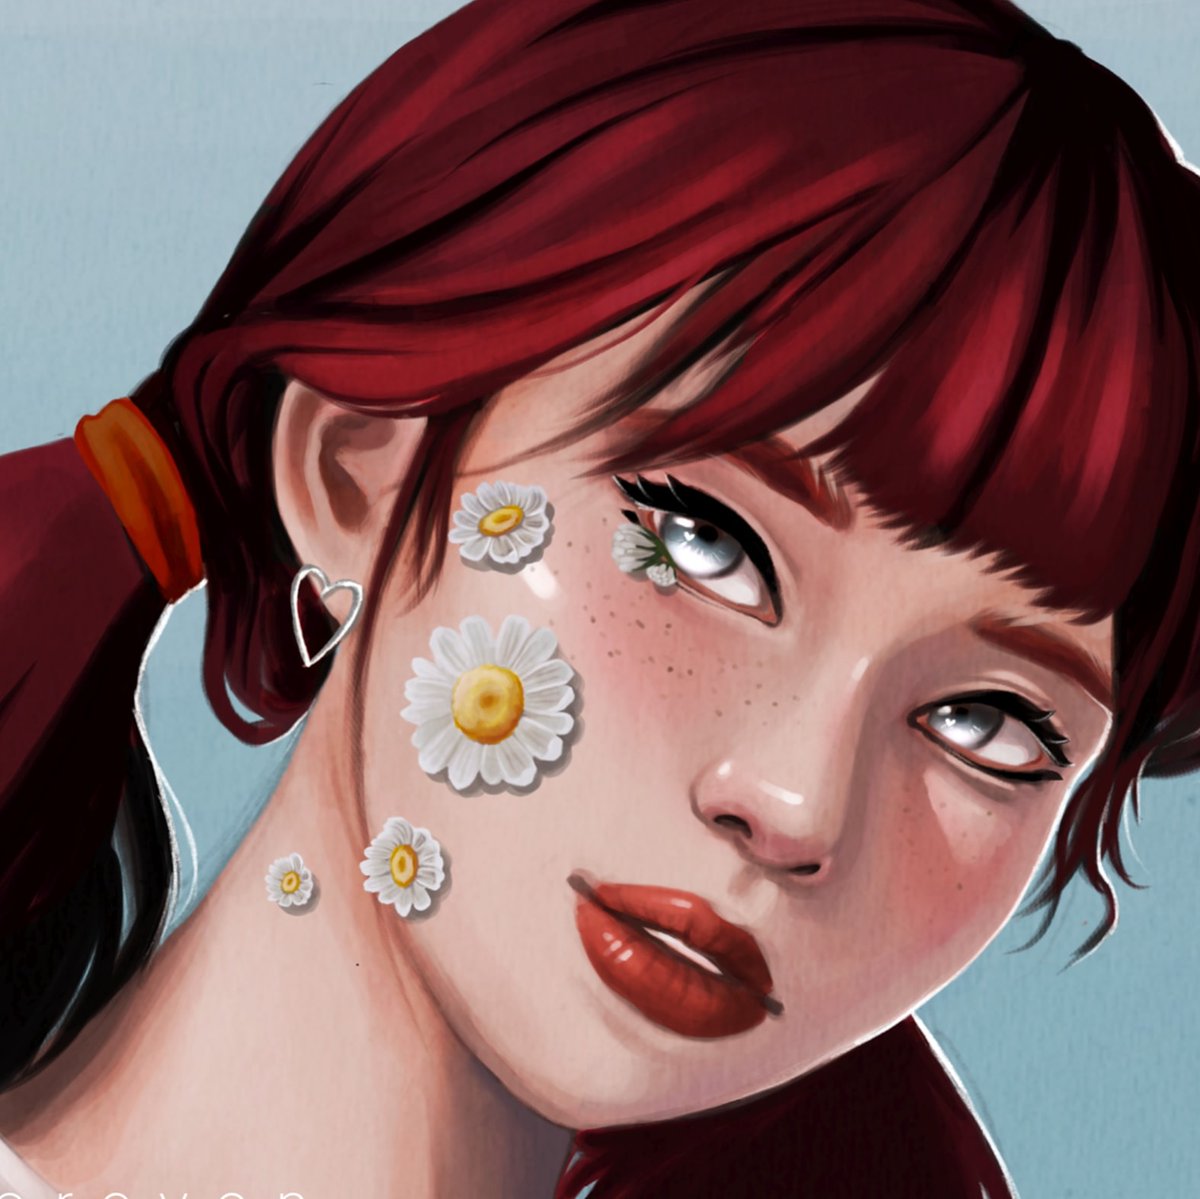 Hello! I'm Flo! Freelance Digital artist from the Ph I do mostly semi-realistic artHere are some of my works~Commission me:  http://sfloreven.carrd.co Ig:  http://www.instragram.com/sfloreven Fb:  http://www.fb.com/sfloreven 